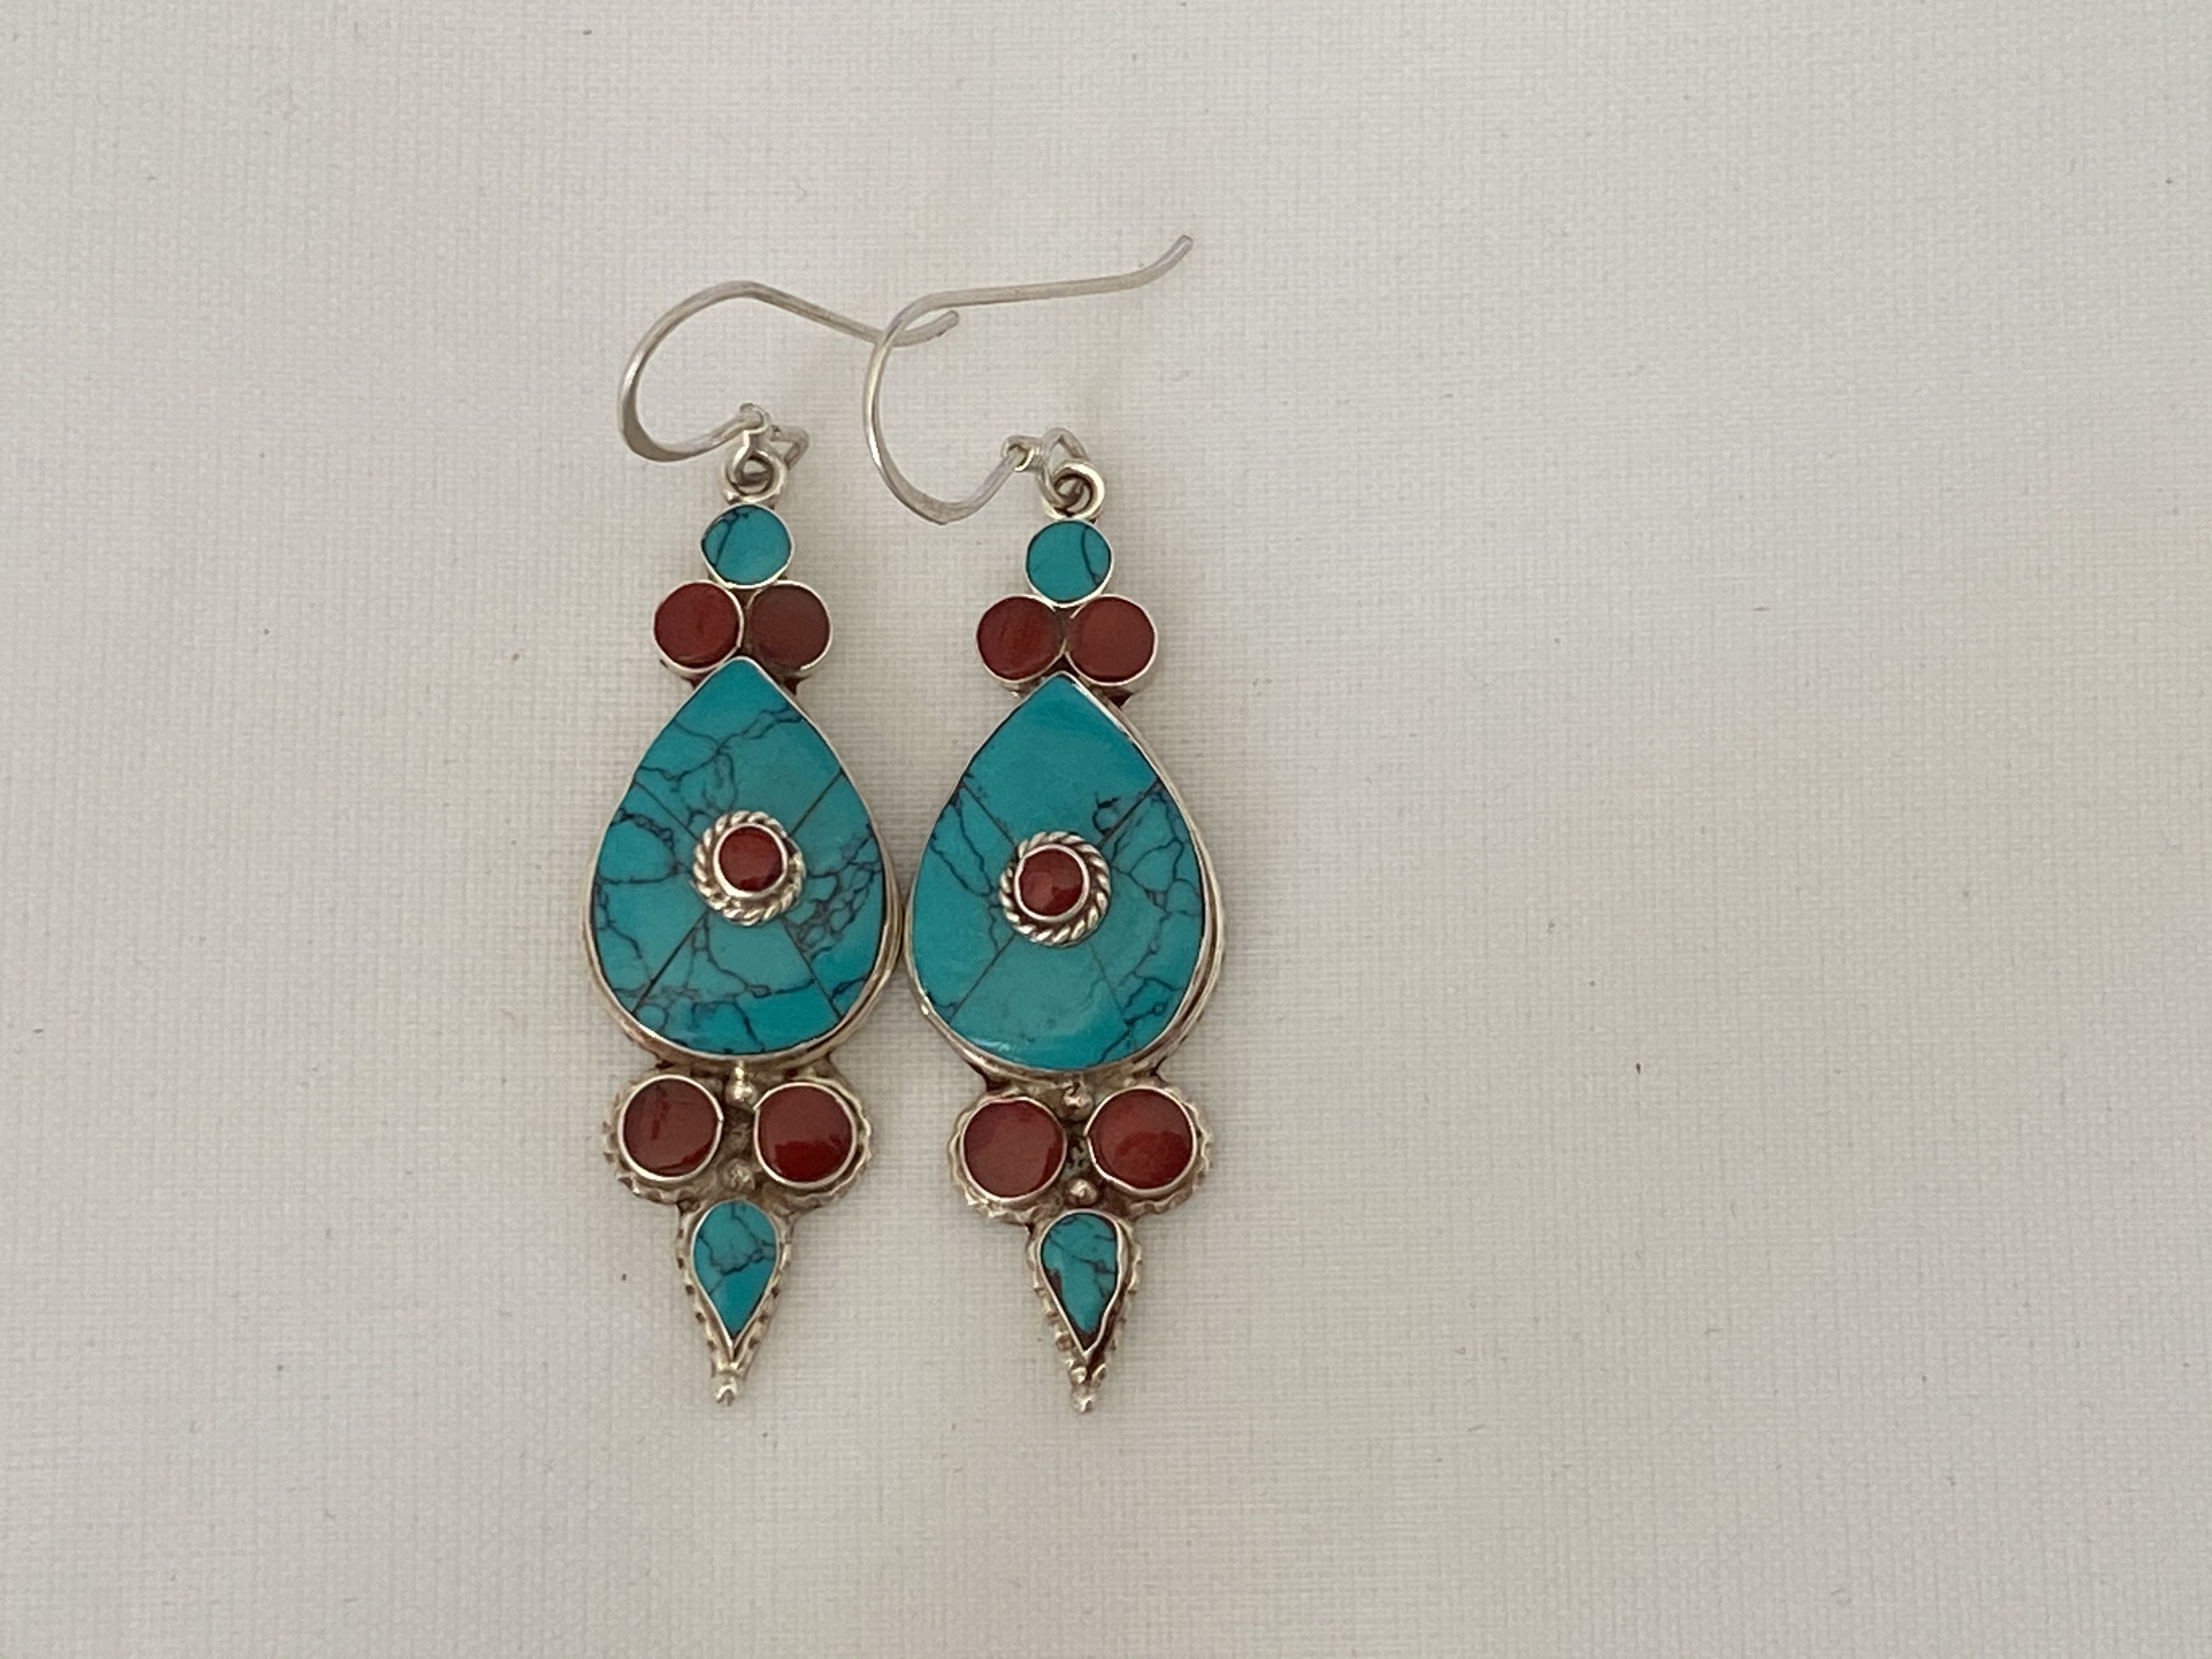 Traditional Tibetan Earring, Tear-drop shape, turquoise and sterling ...